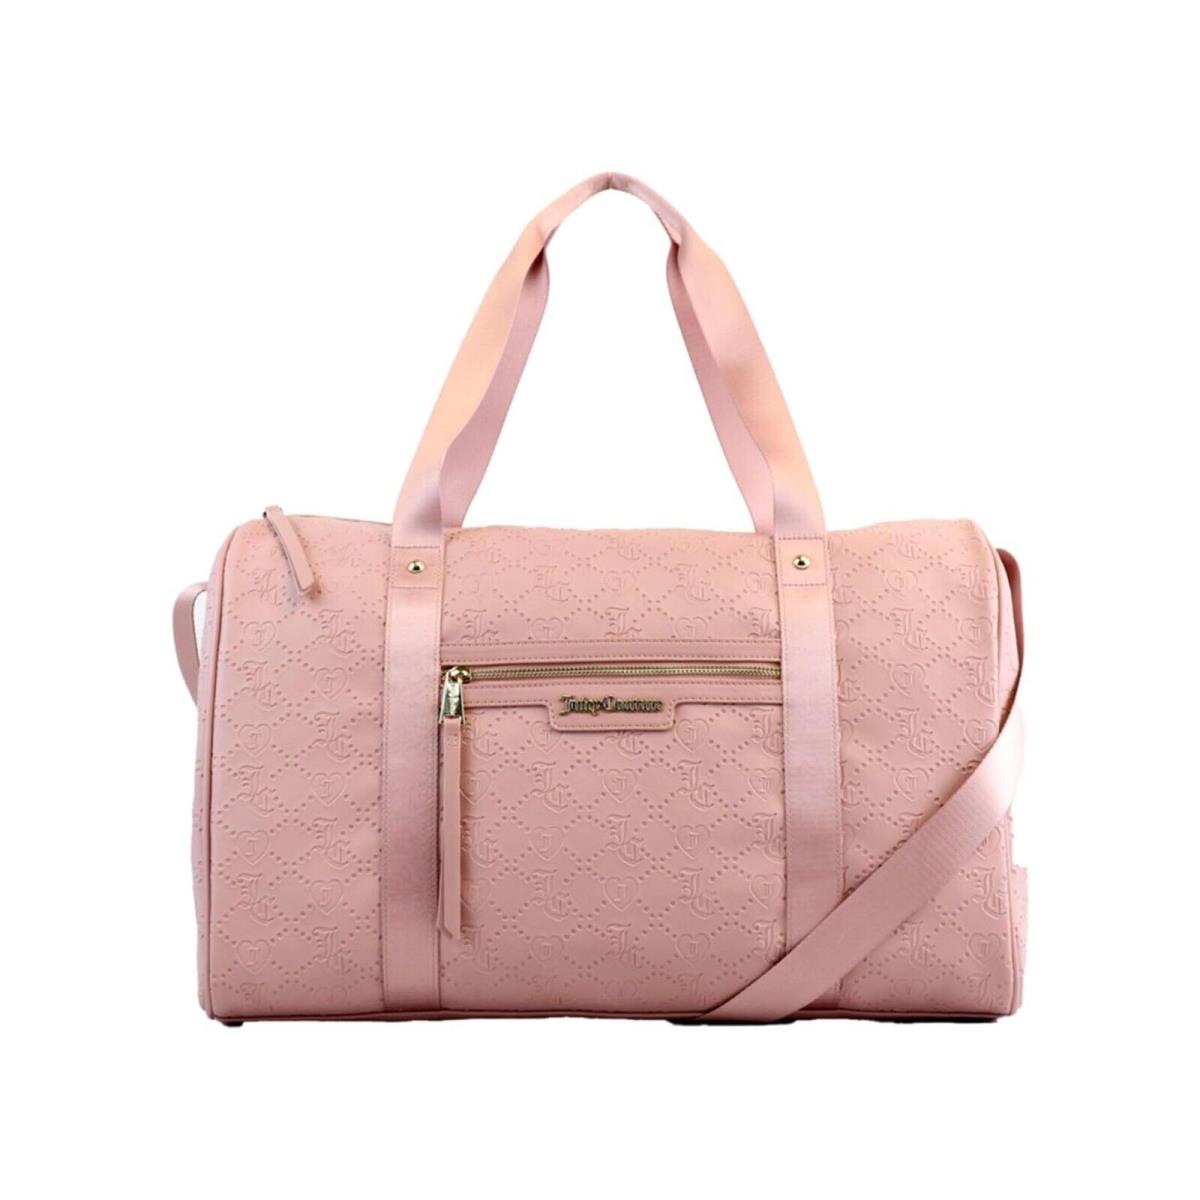 Juicy Couture Rosie Overnight Duffle Weekender Large Bag Dusty Blush JC Logo - Handle/Strap: , Hardware: Gold, Exterior: